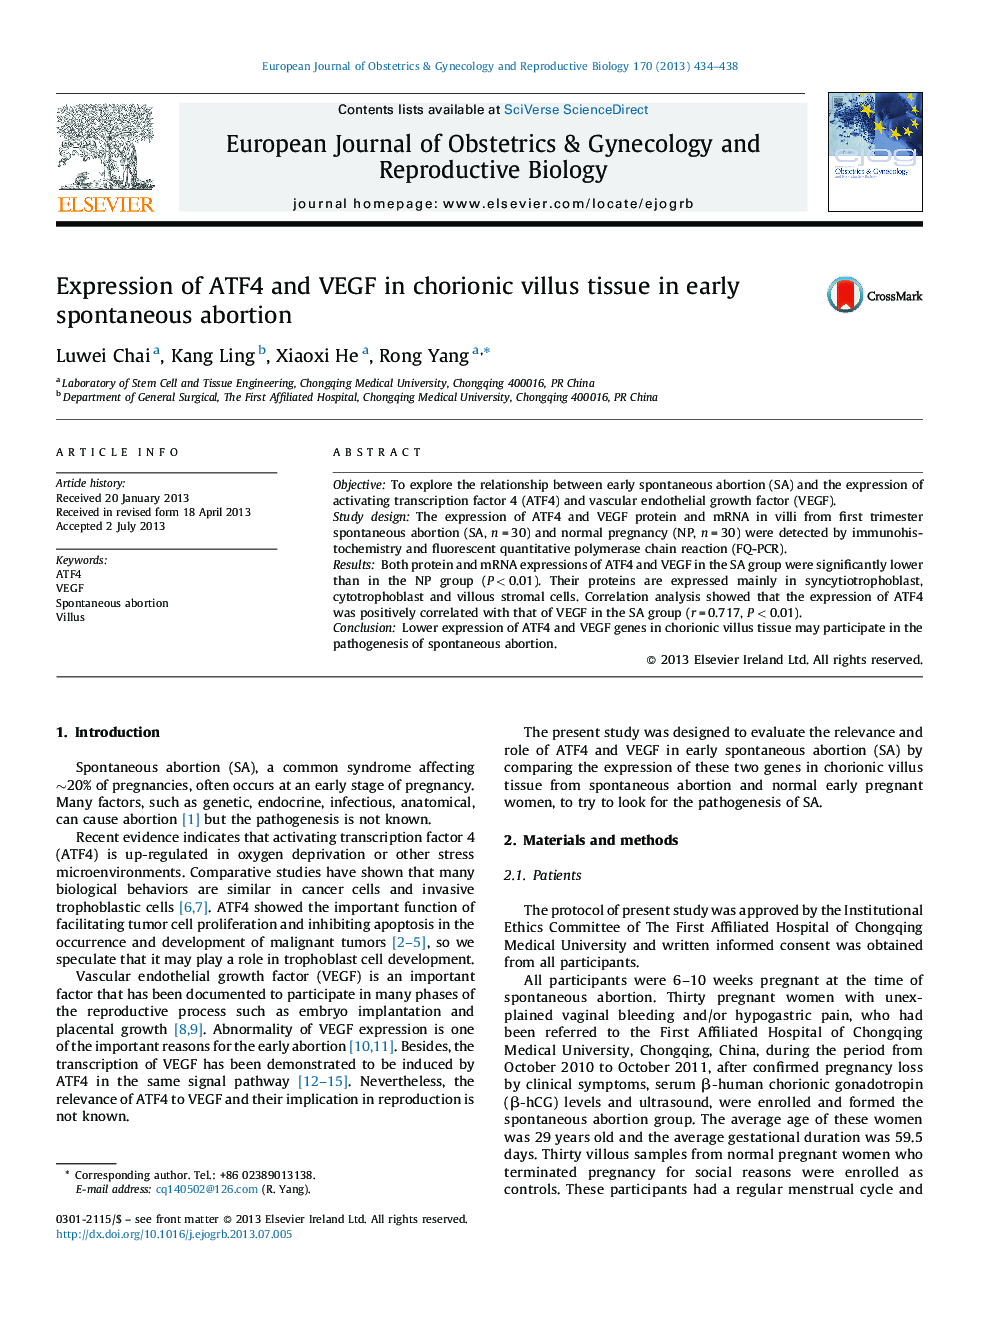 Expression of ATF4 and VEGF in chorionic villus tissue in early spontaneous abortion